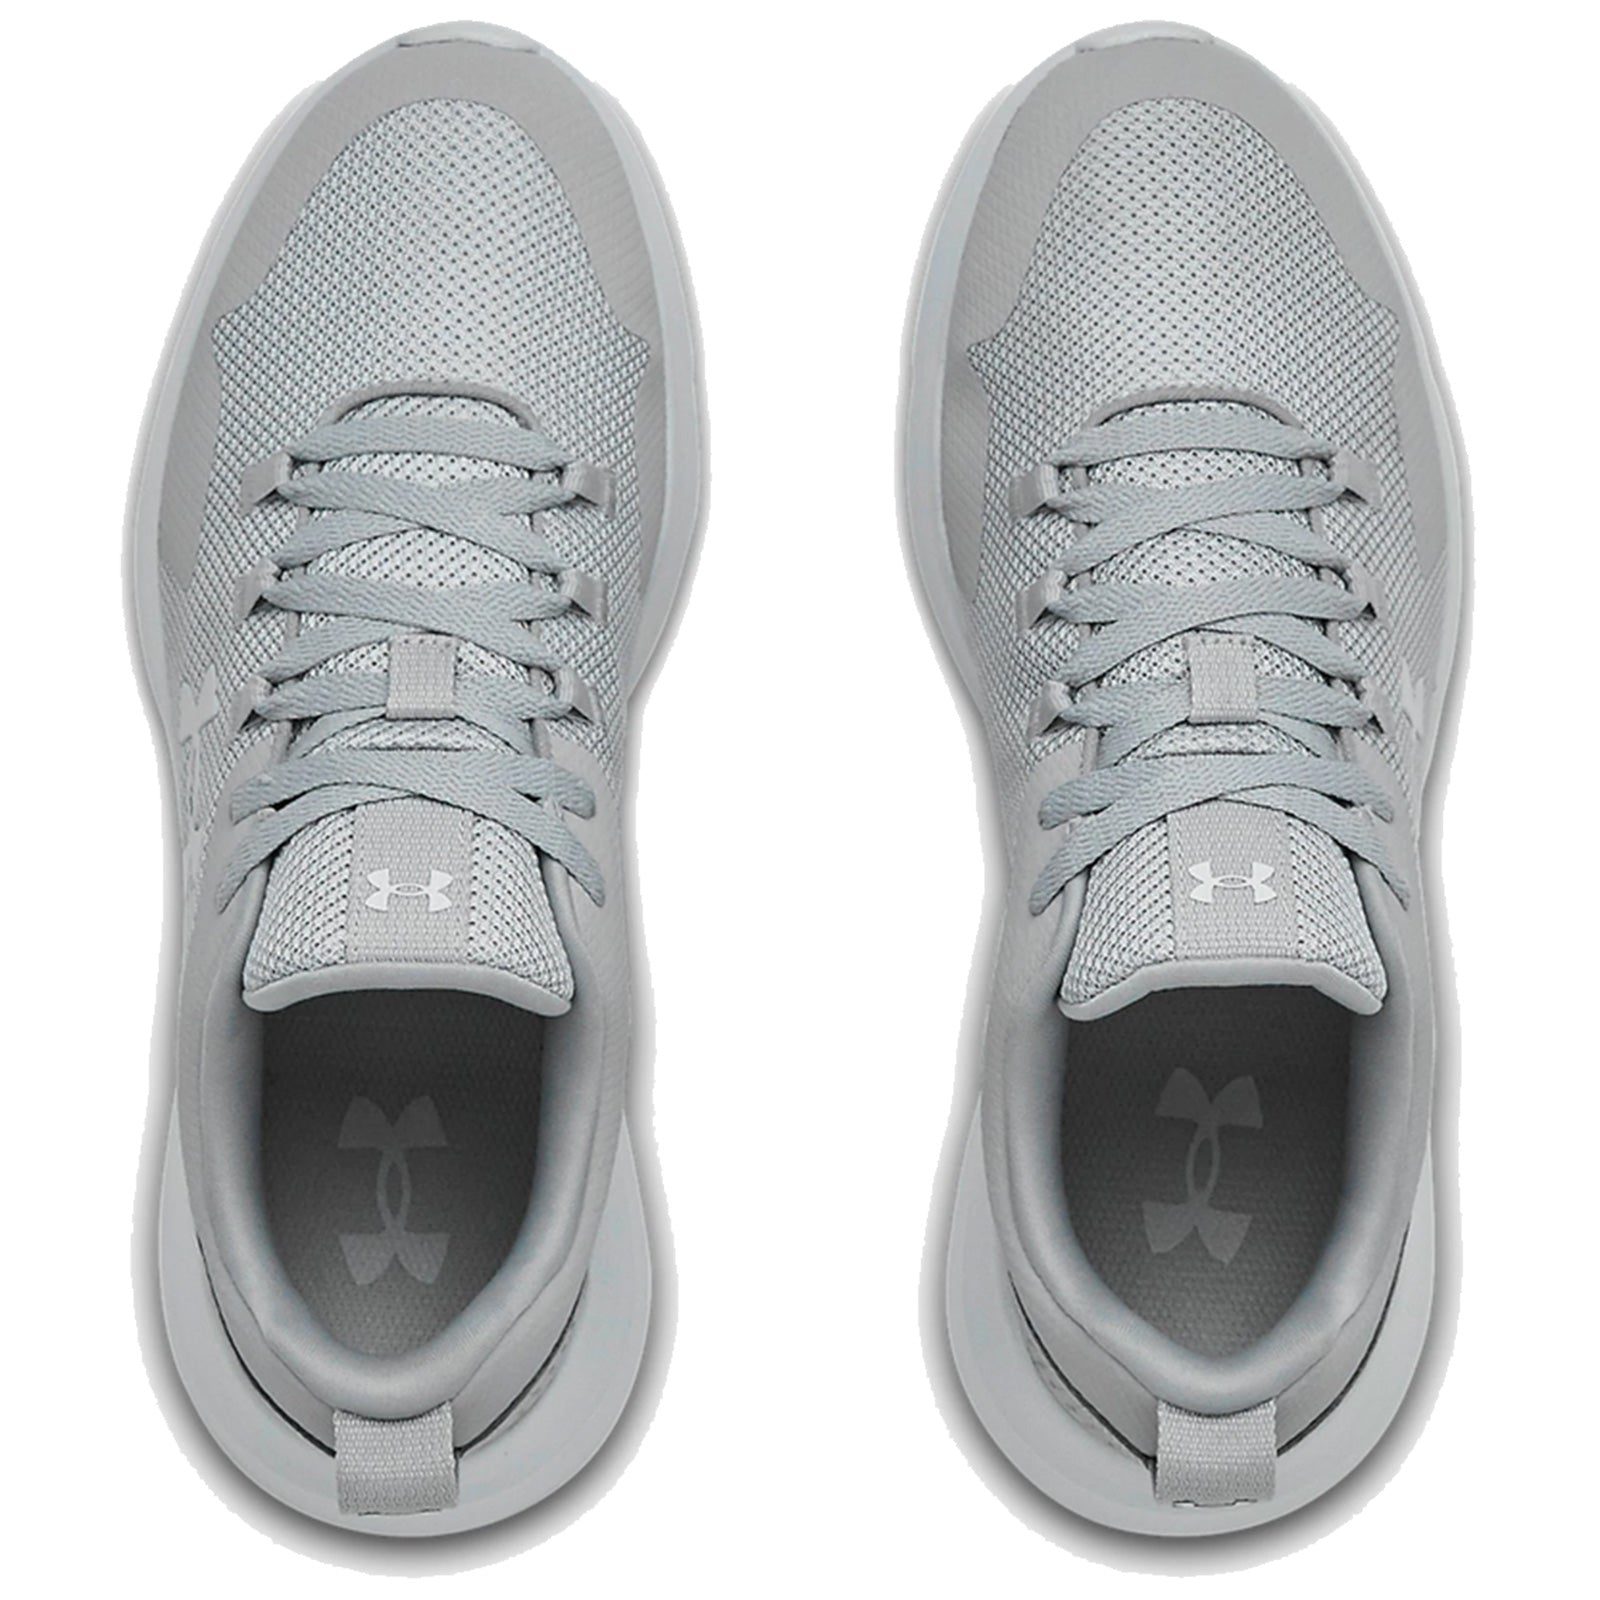 Under Armour Mens Essential Sportstyle Trainers